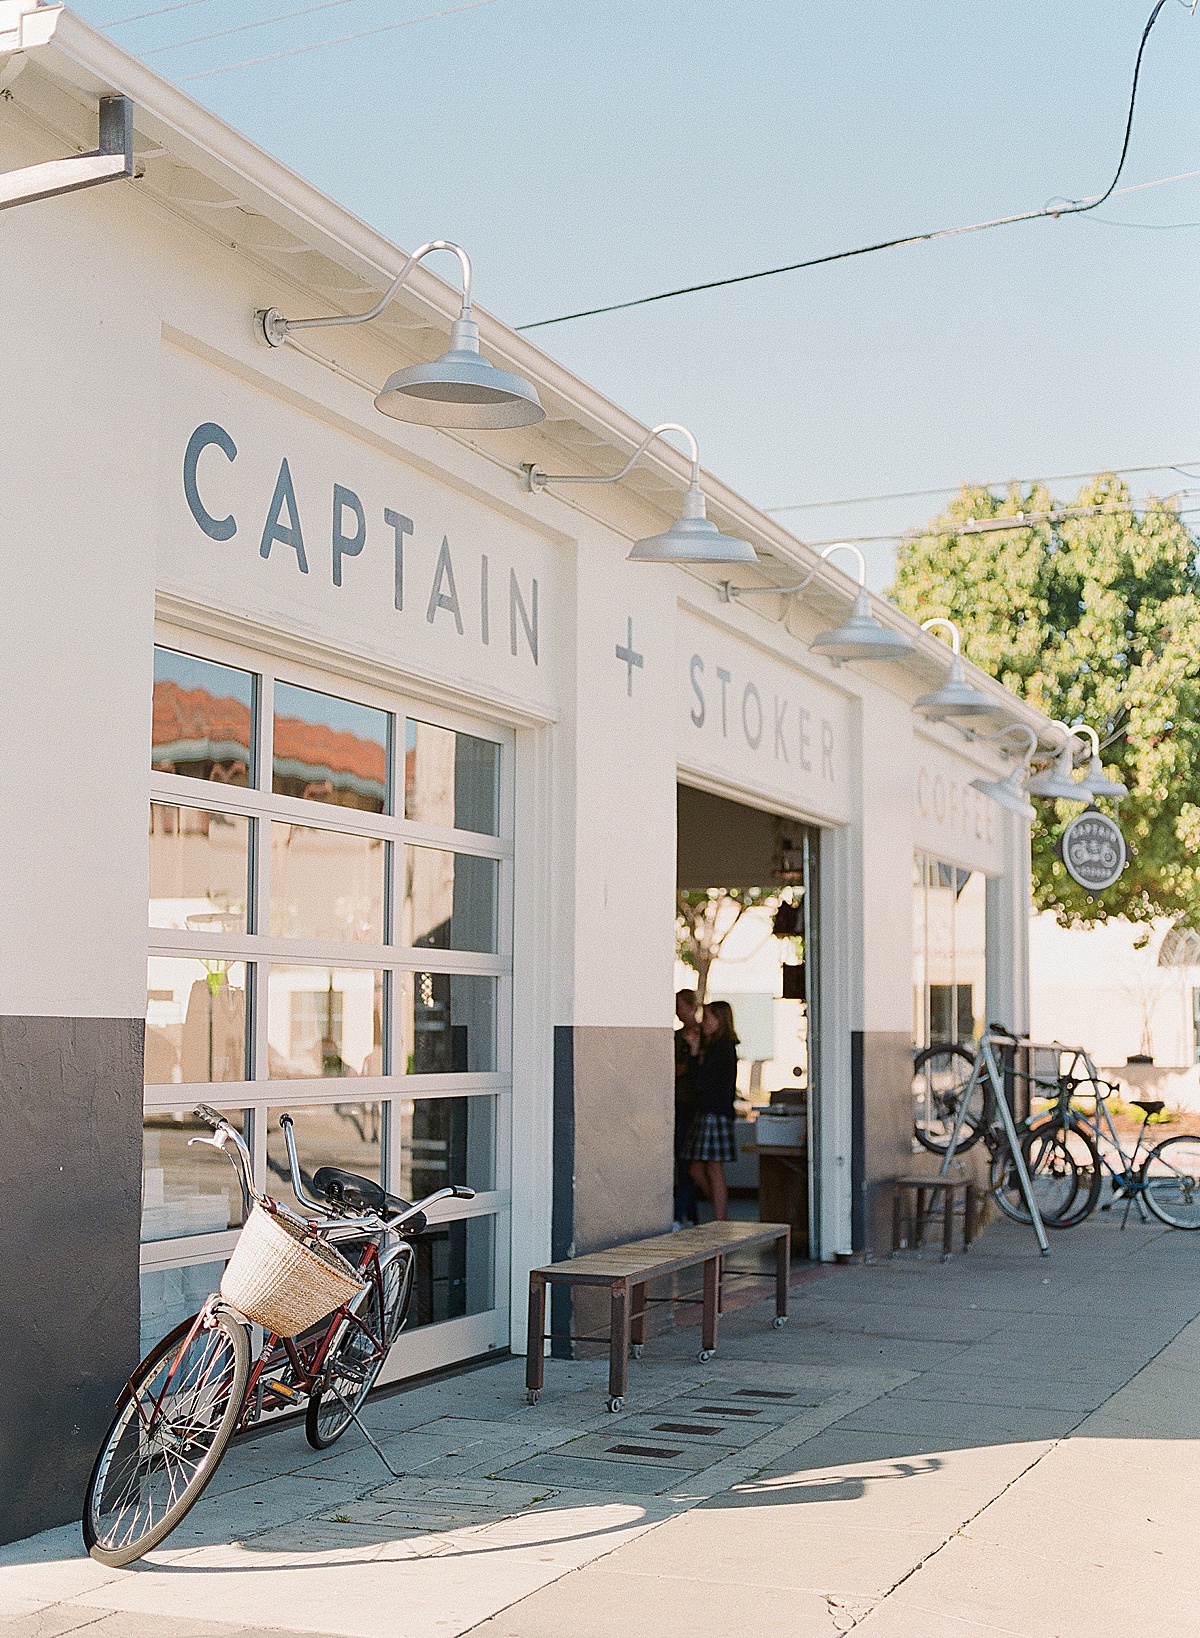 Highway 1 California Captain and Stoker Coffee Shop In Monterey Photo